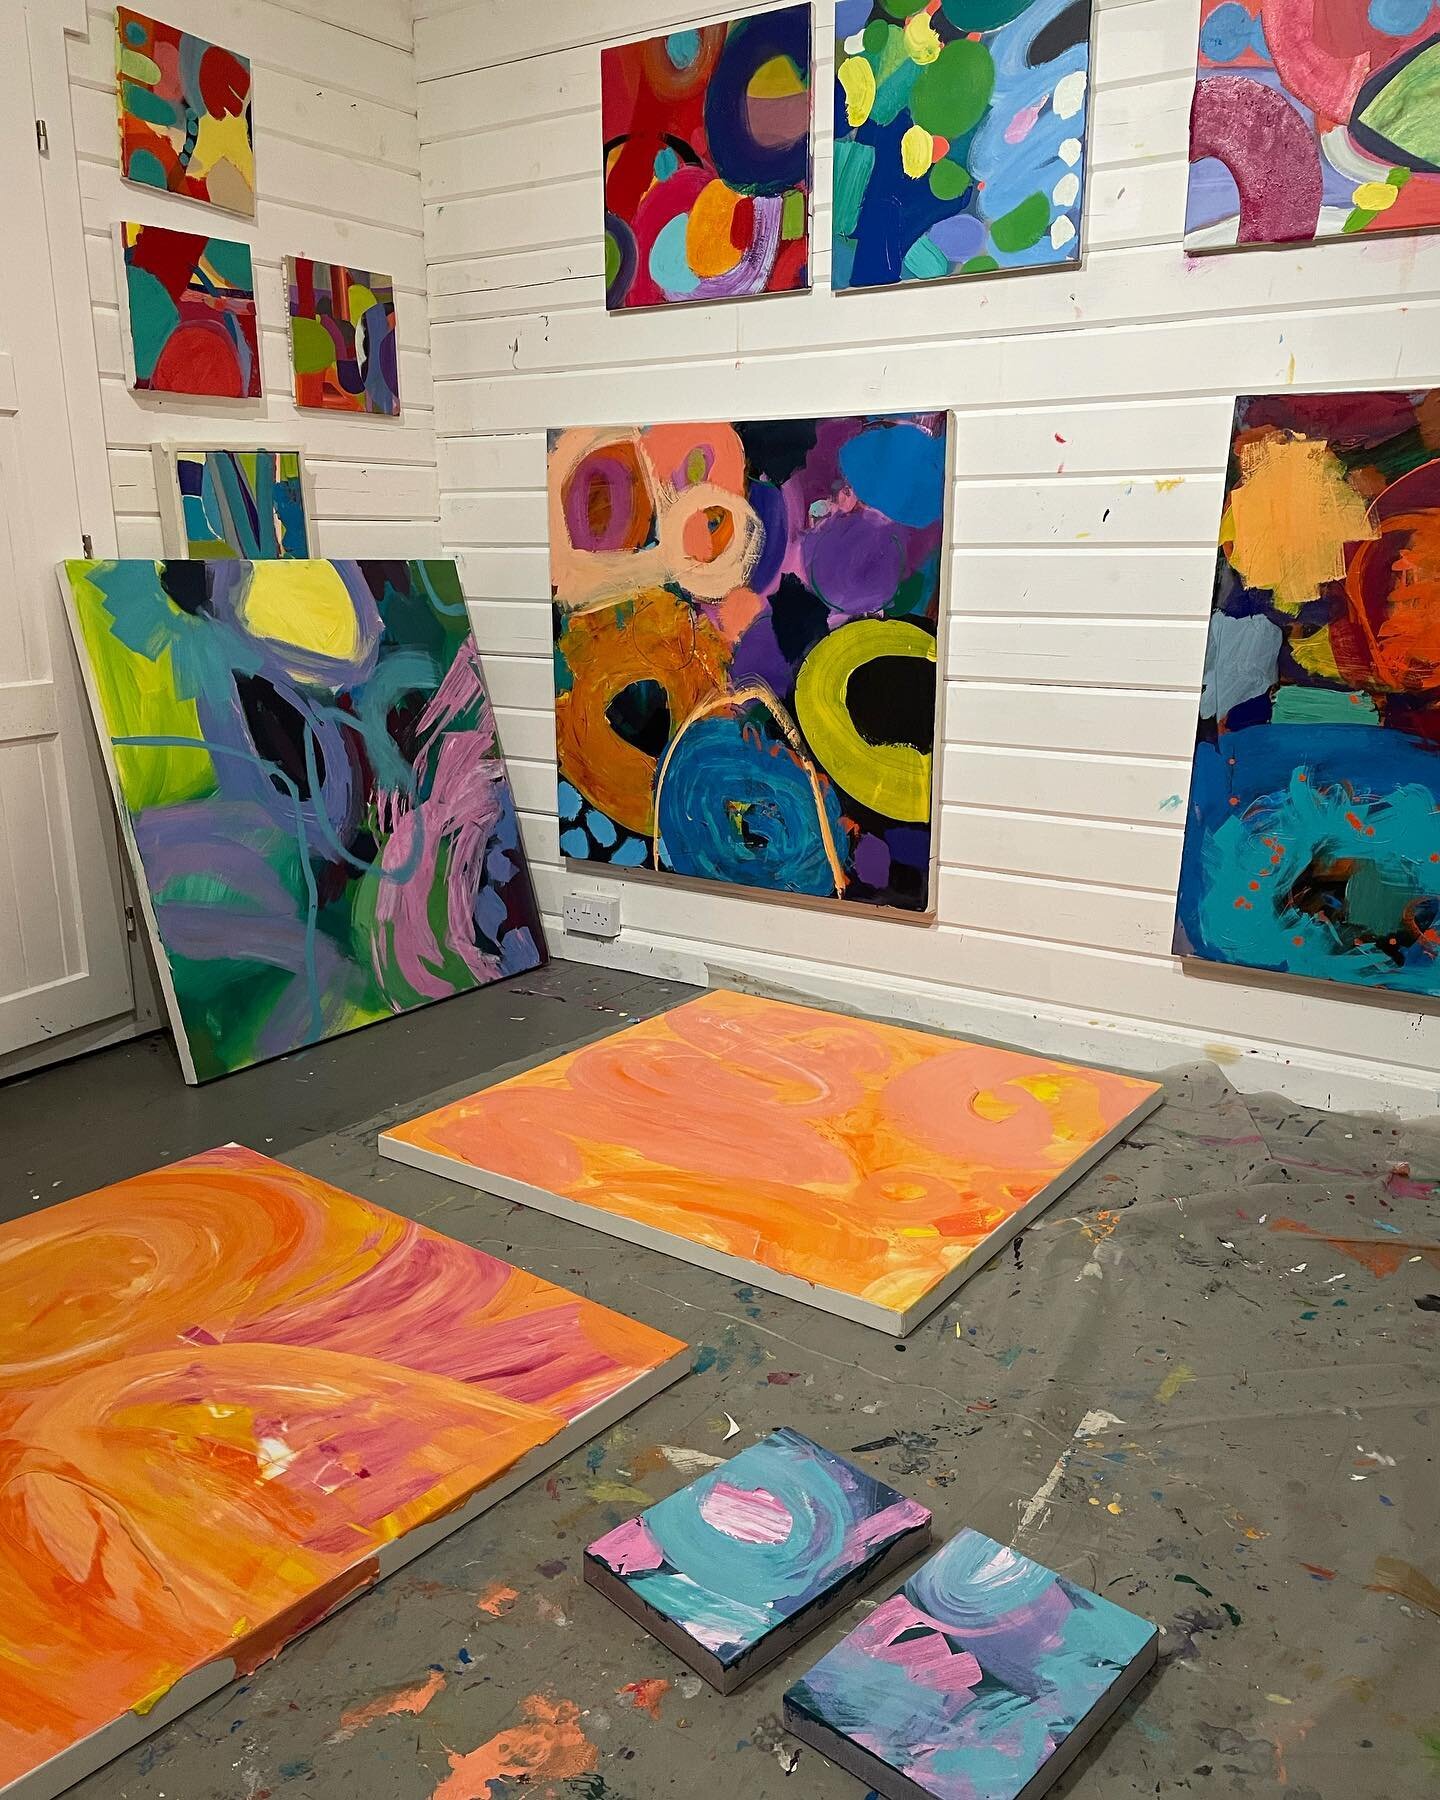 Britain is so welcoming&hellip;it&rsquo;s tanking down outside my studio but I&rsquo;m bringing in the light and sunny warmth with these new canvases. They&rsquo;re feeling slightly meditative at this stage

#meditation #sunshine #abstractpainting #a